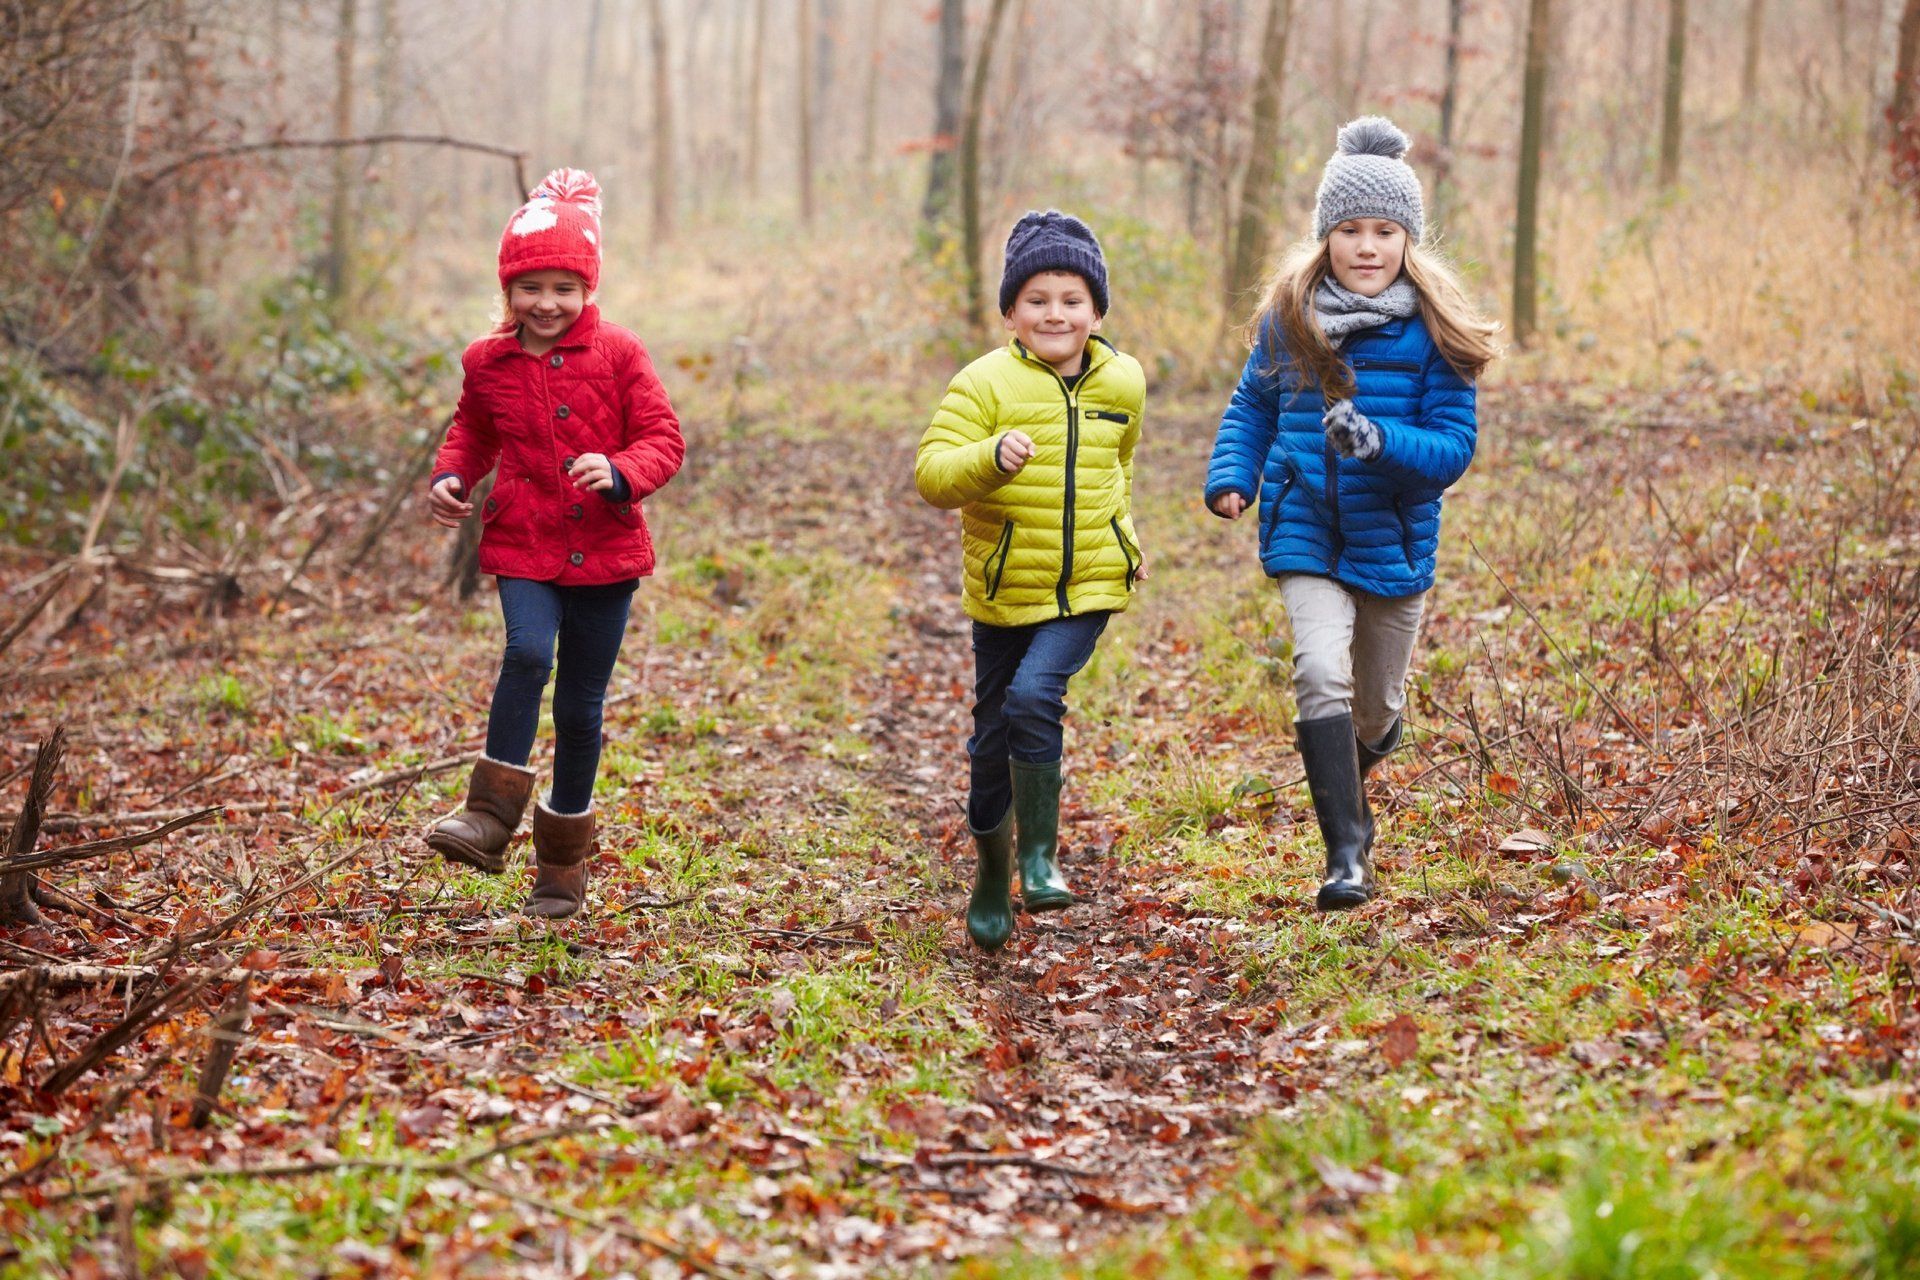 Three young siblings in colorful clothing, running through the woods